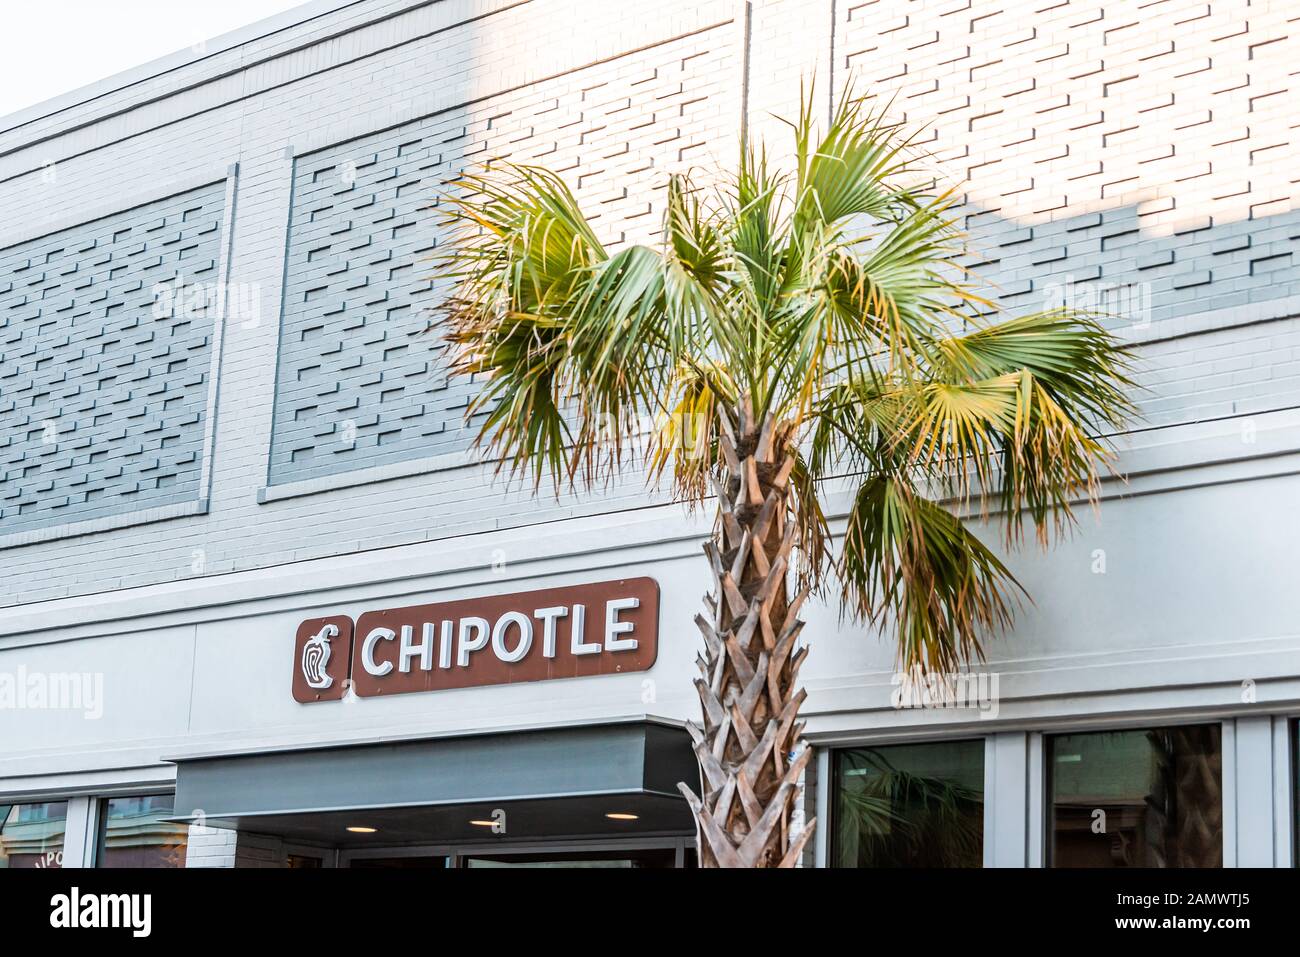 Charleston, USA - May 12, 2018: Downtown city King street in South Carolina in southern town with colorful building and sign for Chipotle restaurant Stock Photo